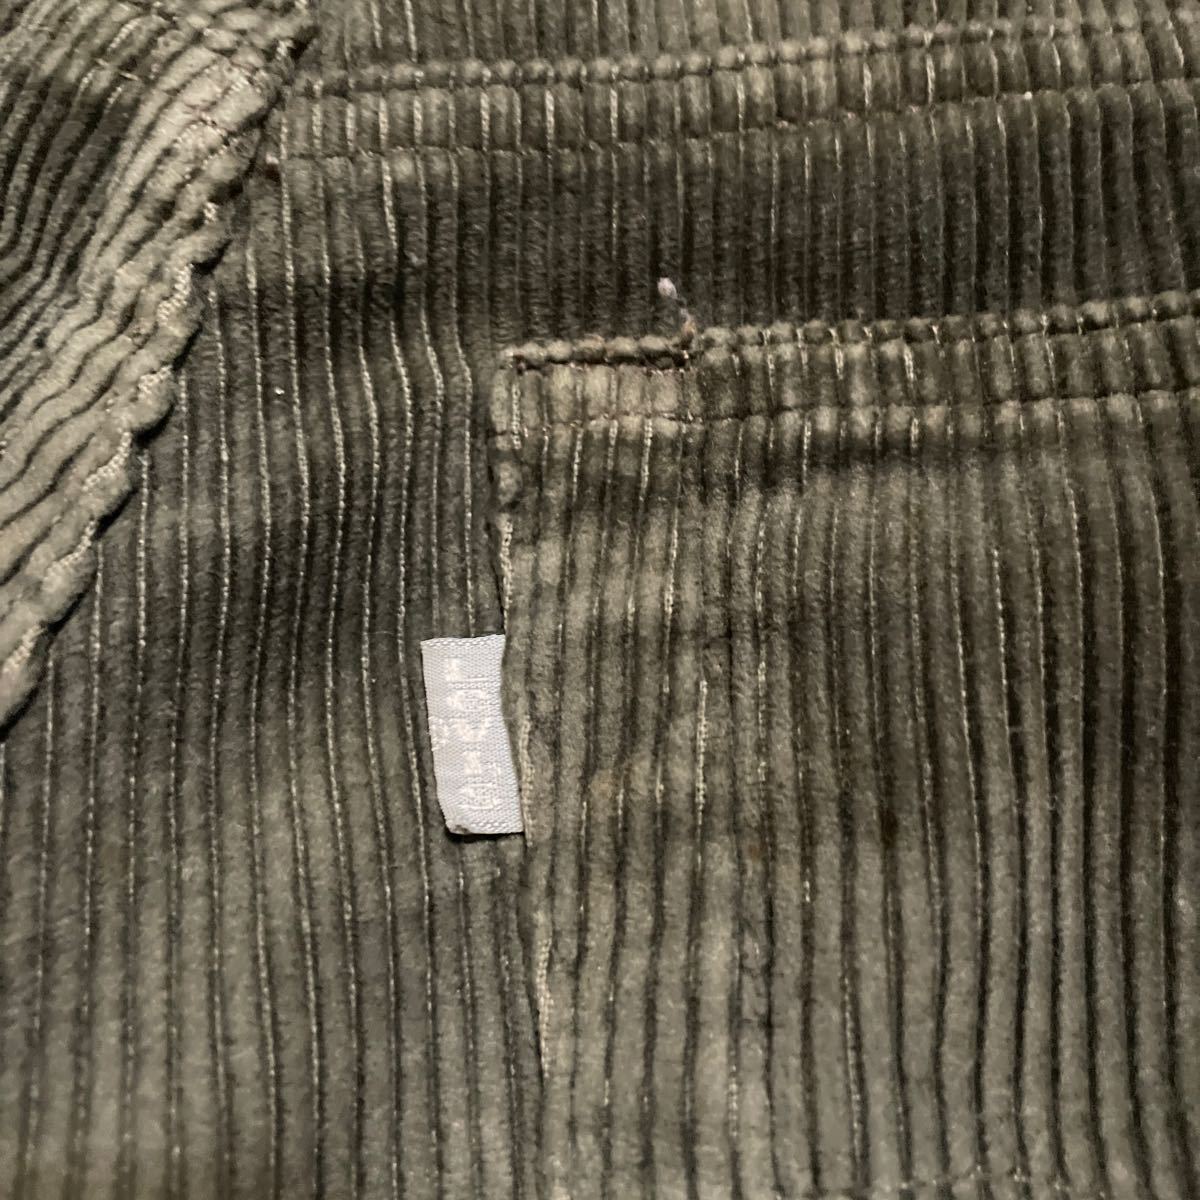  rare 90s[LEVIS]USA made [SILVER TAB] corduroy baggy pants Levi's silver tabBAGGY Street old clothes VINTAGE Vintage 